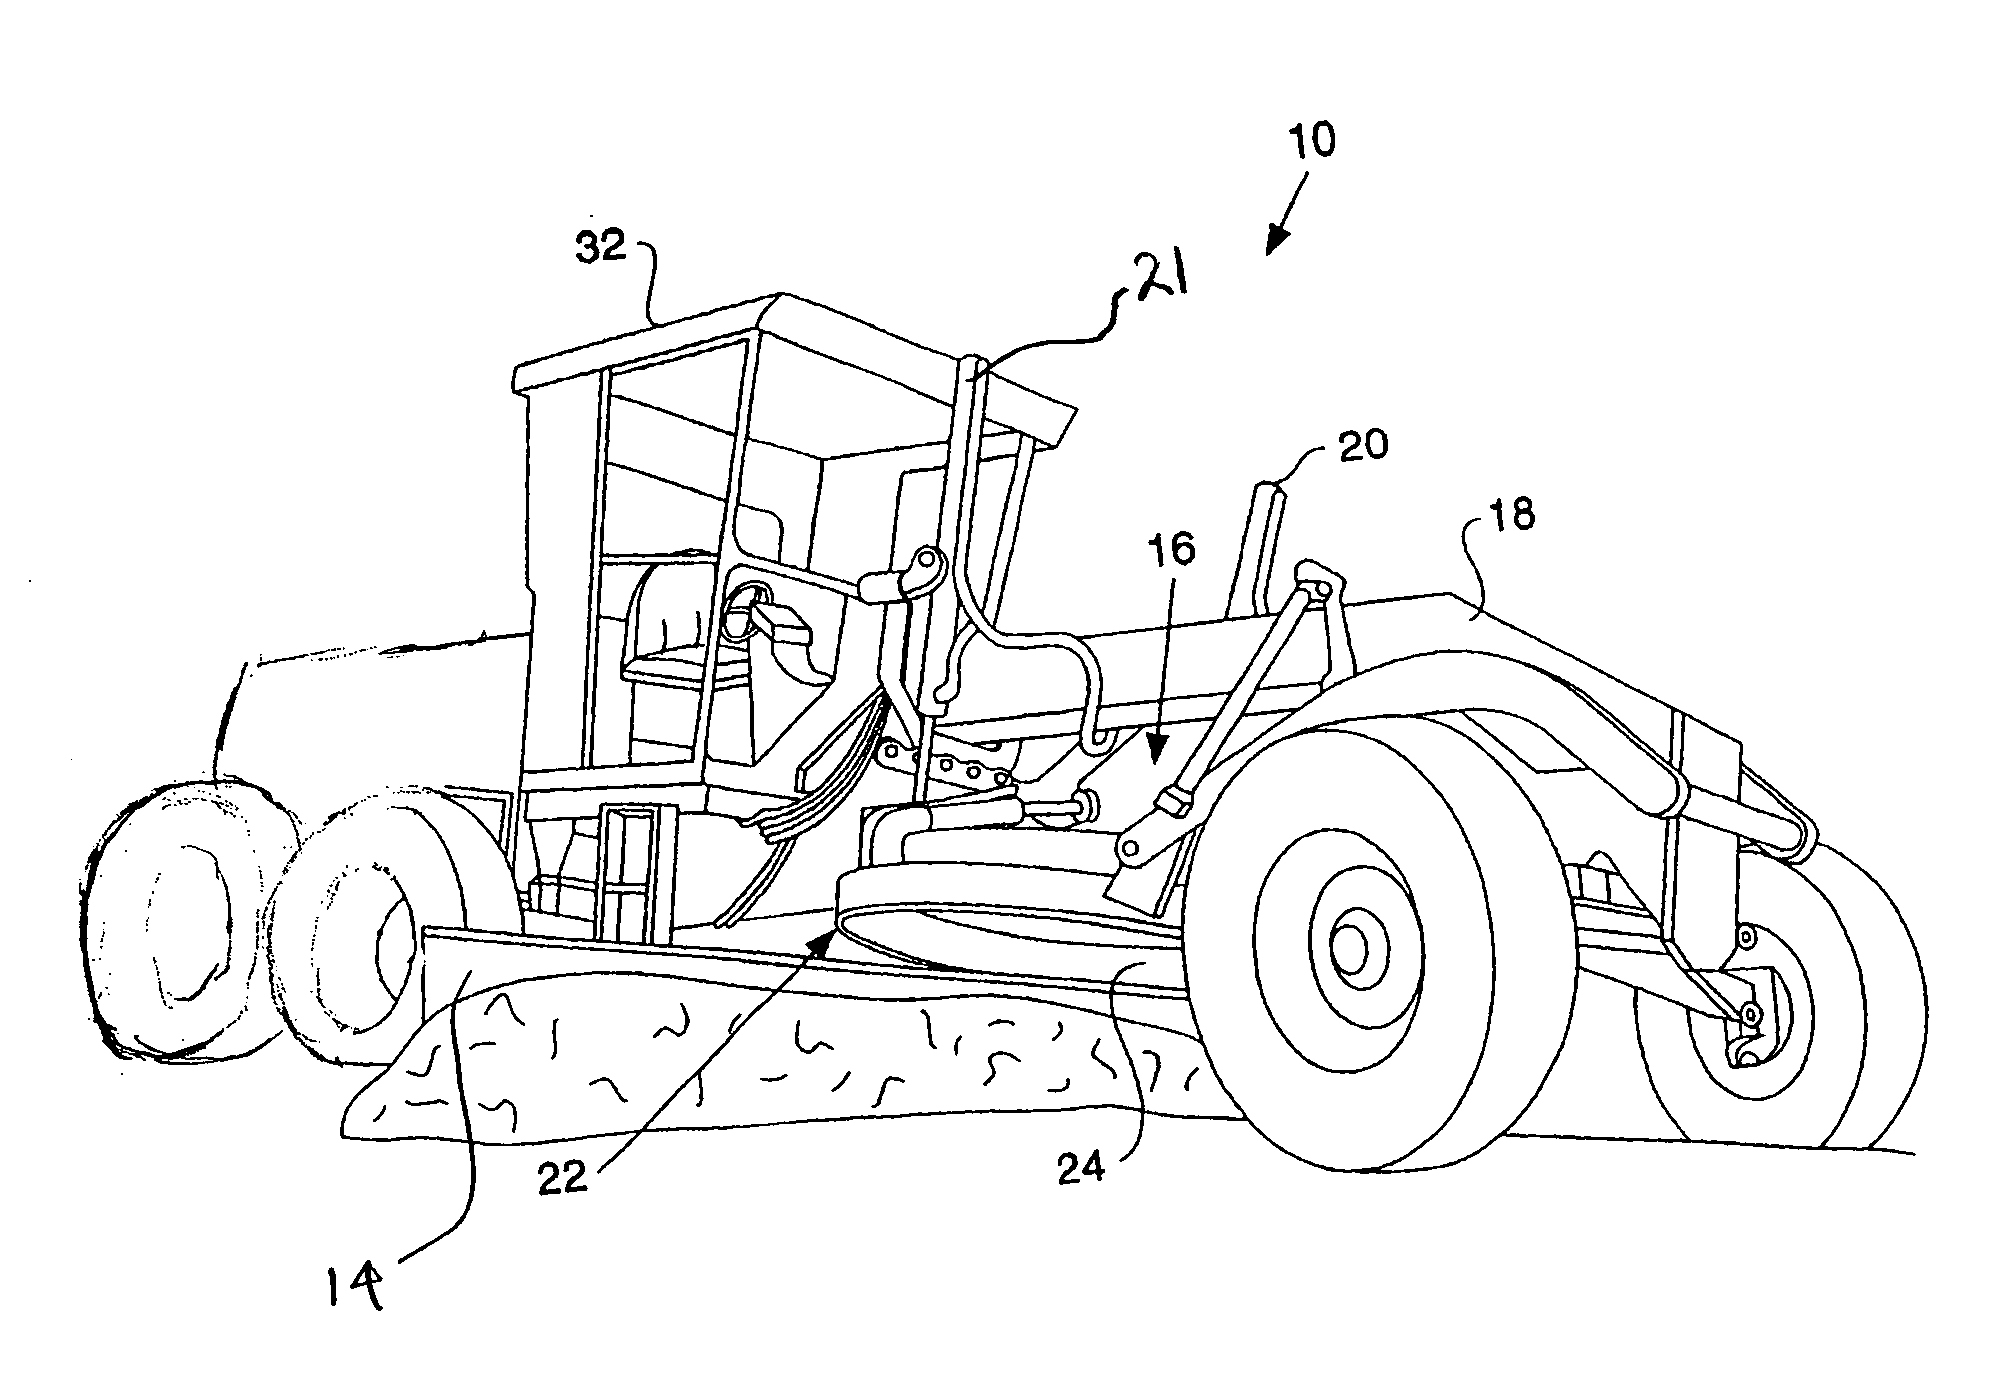 Motor grader and control system therefore